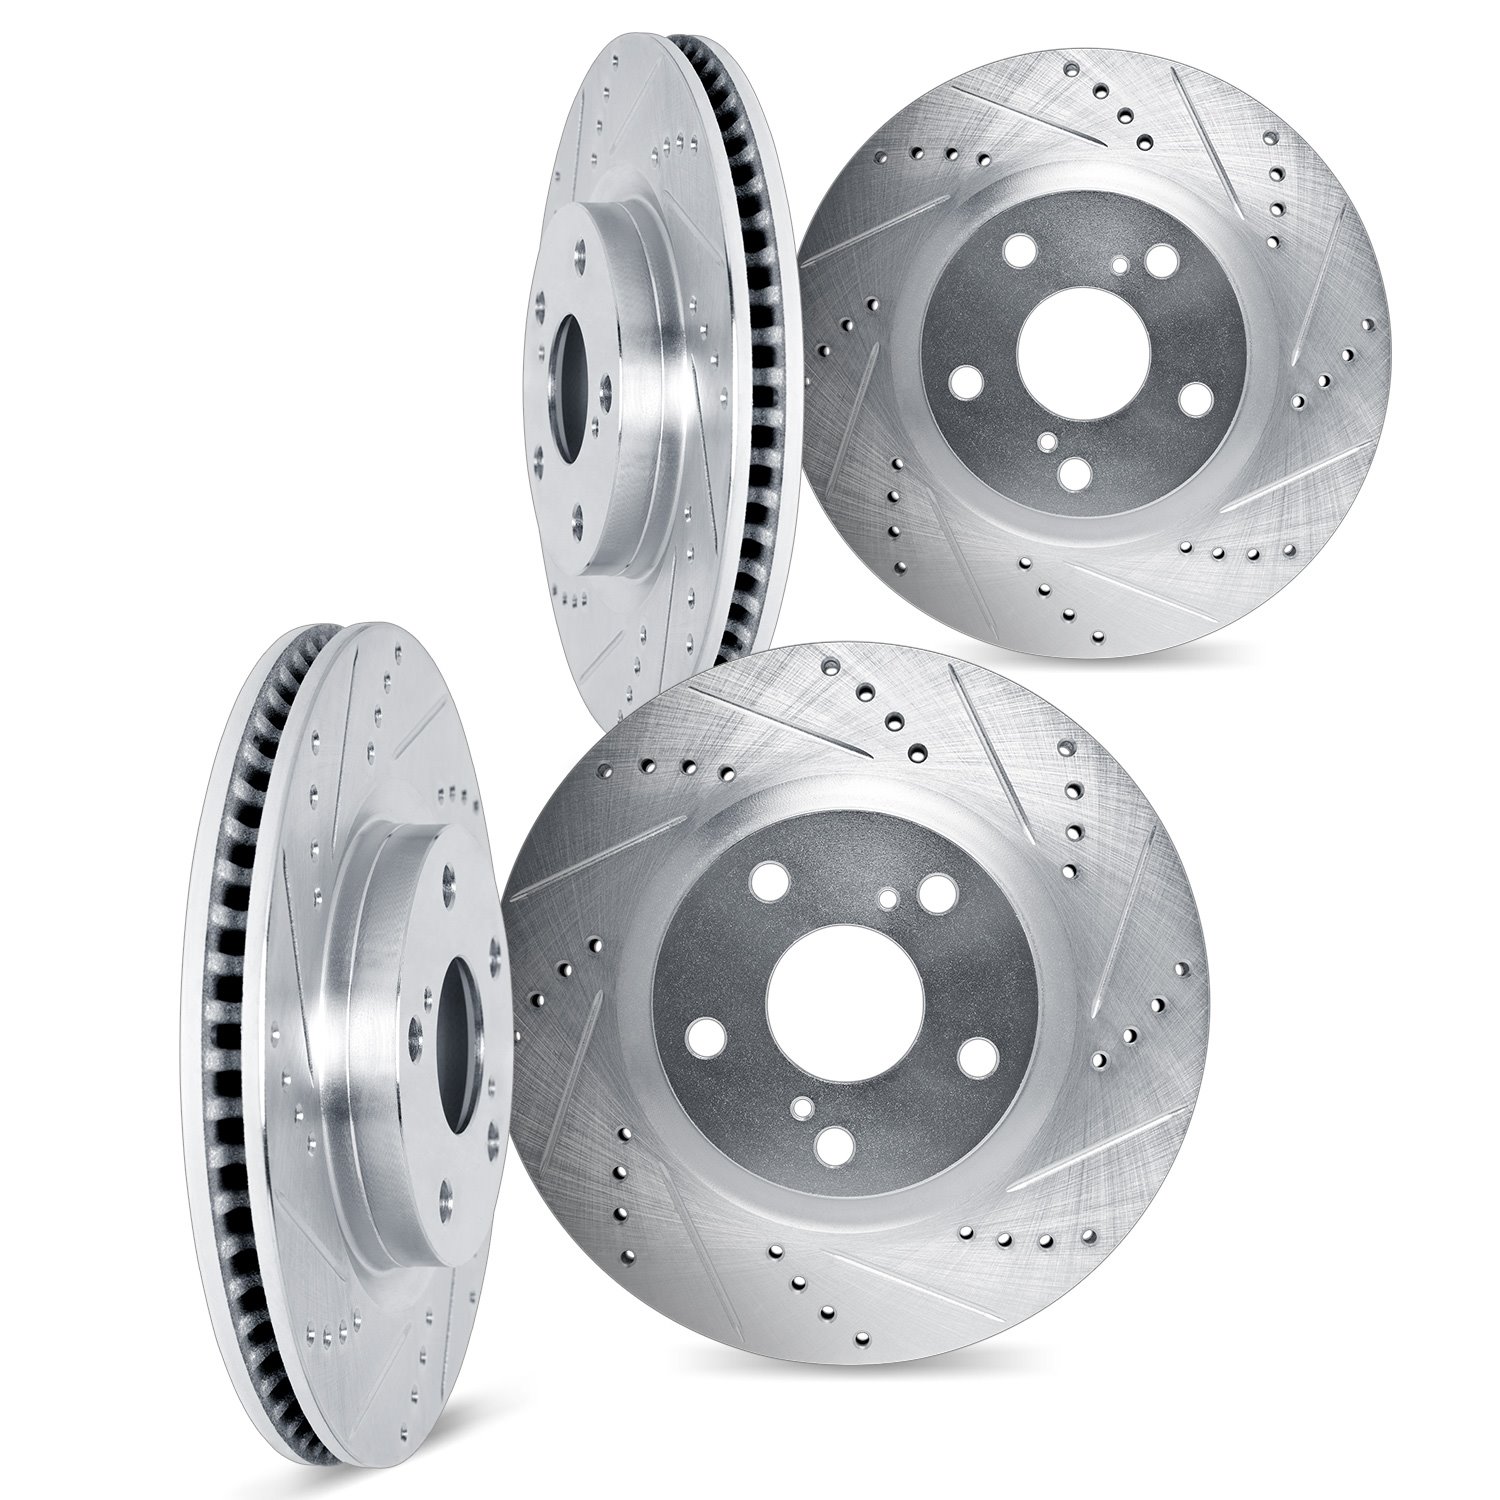 7004-54089 Drilled/Slotted Brake Rotors [Silver], Fits Select Ford/Lincoln/Mercury/Mazda, Position: Front and Rear